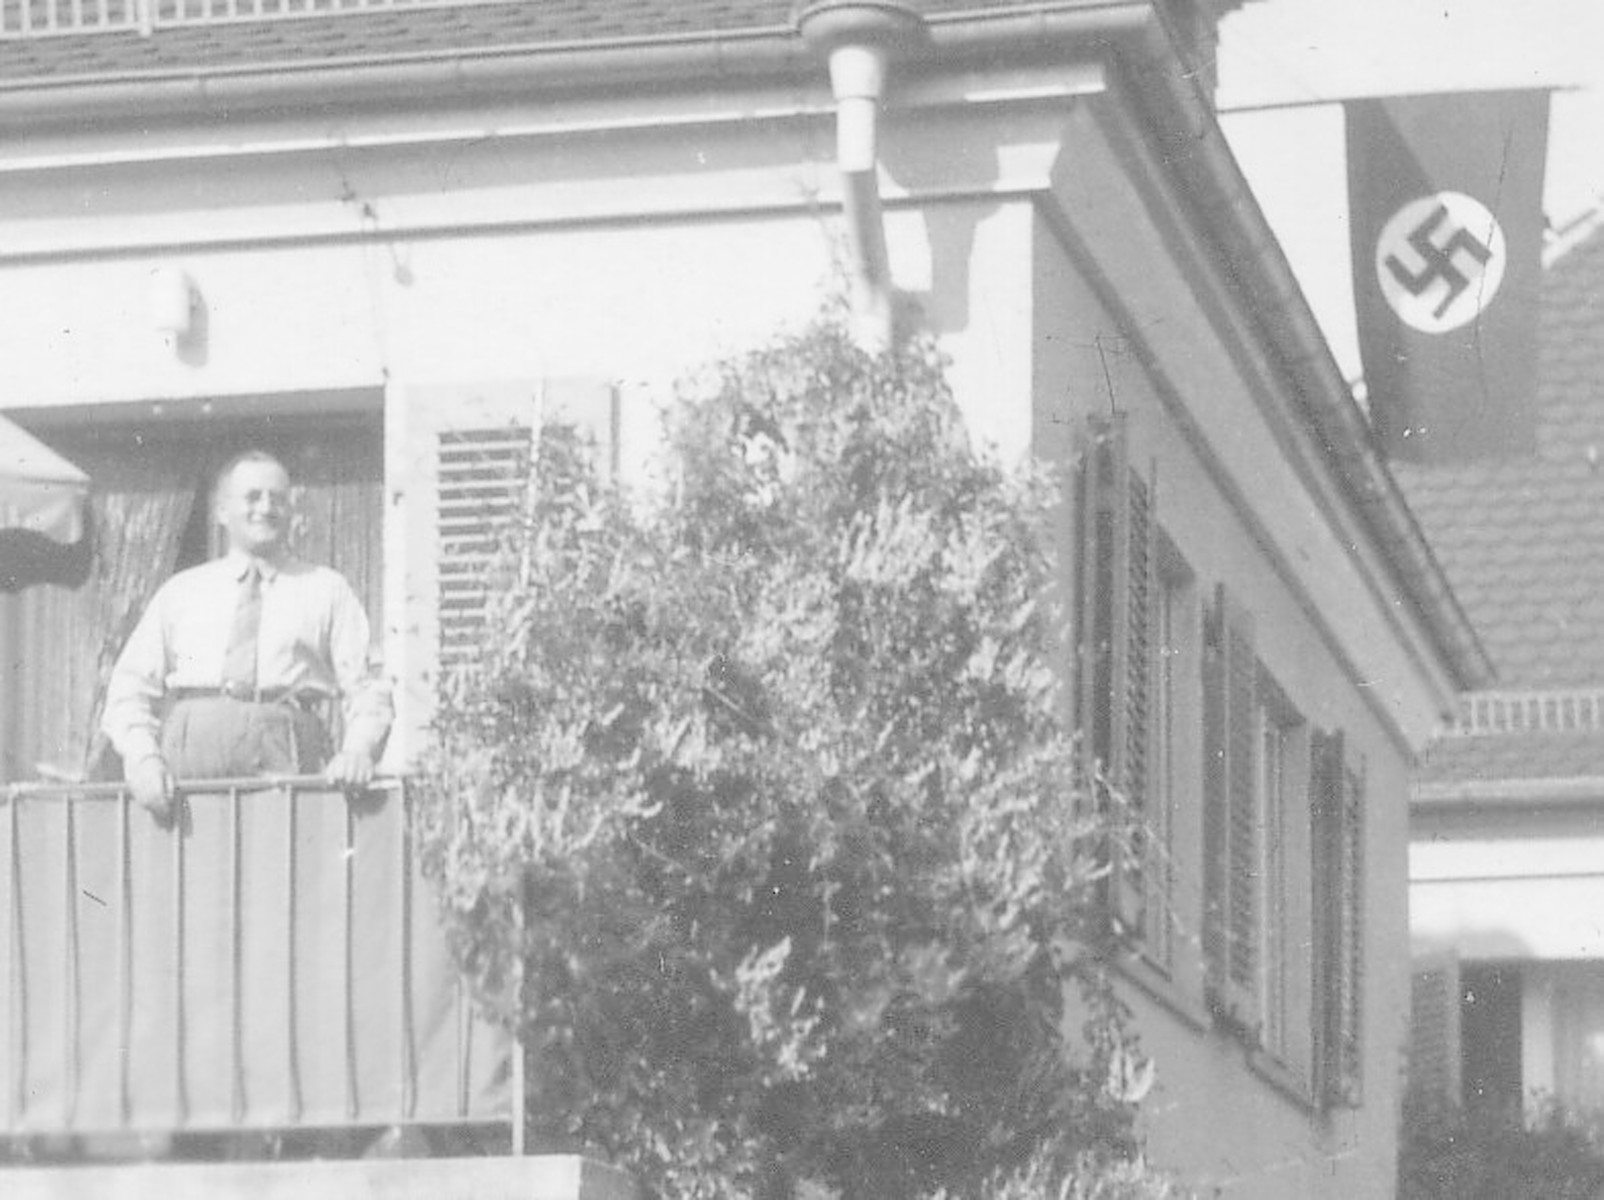 Felix Streim poses on the balcony of his apartment in Germany while a Nazi flag hangs in the background.

Felix Streim was the half-brother of Bertha Rehfisch (and great uncle of the donor).  He immigrated to New York City before WWII.